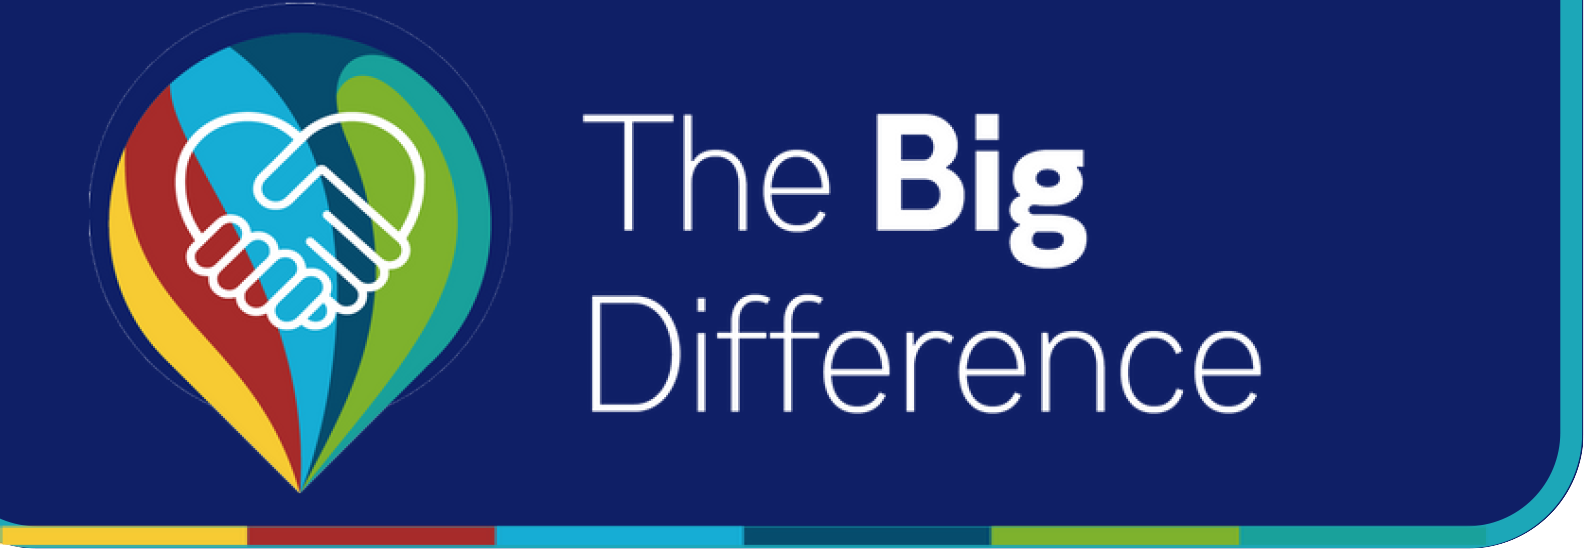 The Big difference logo